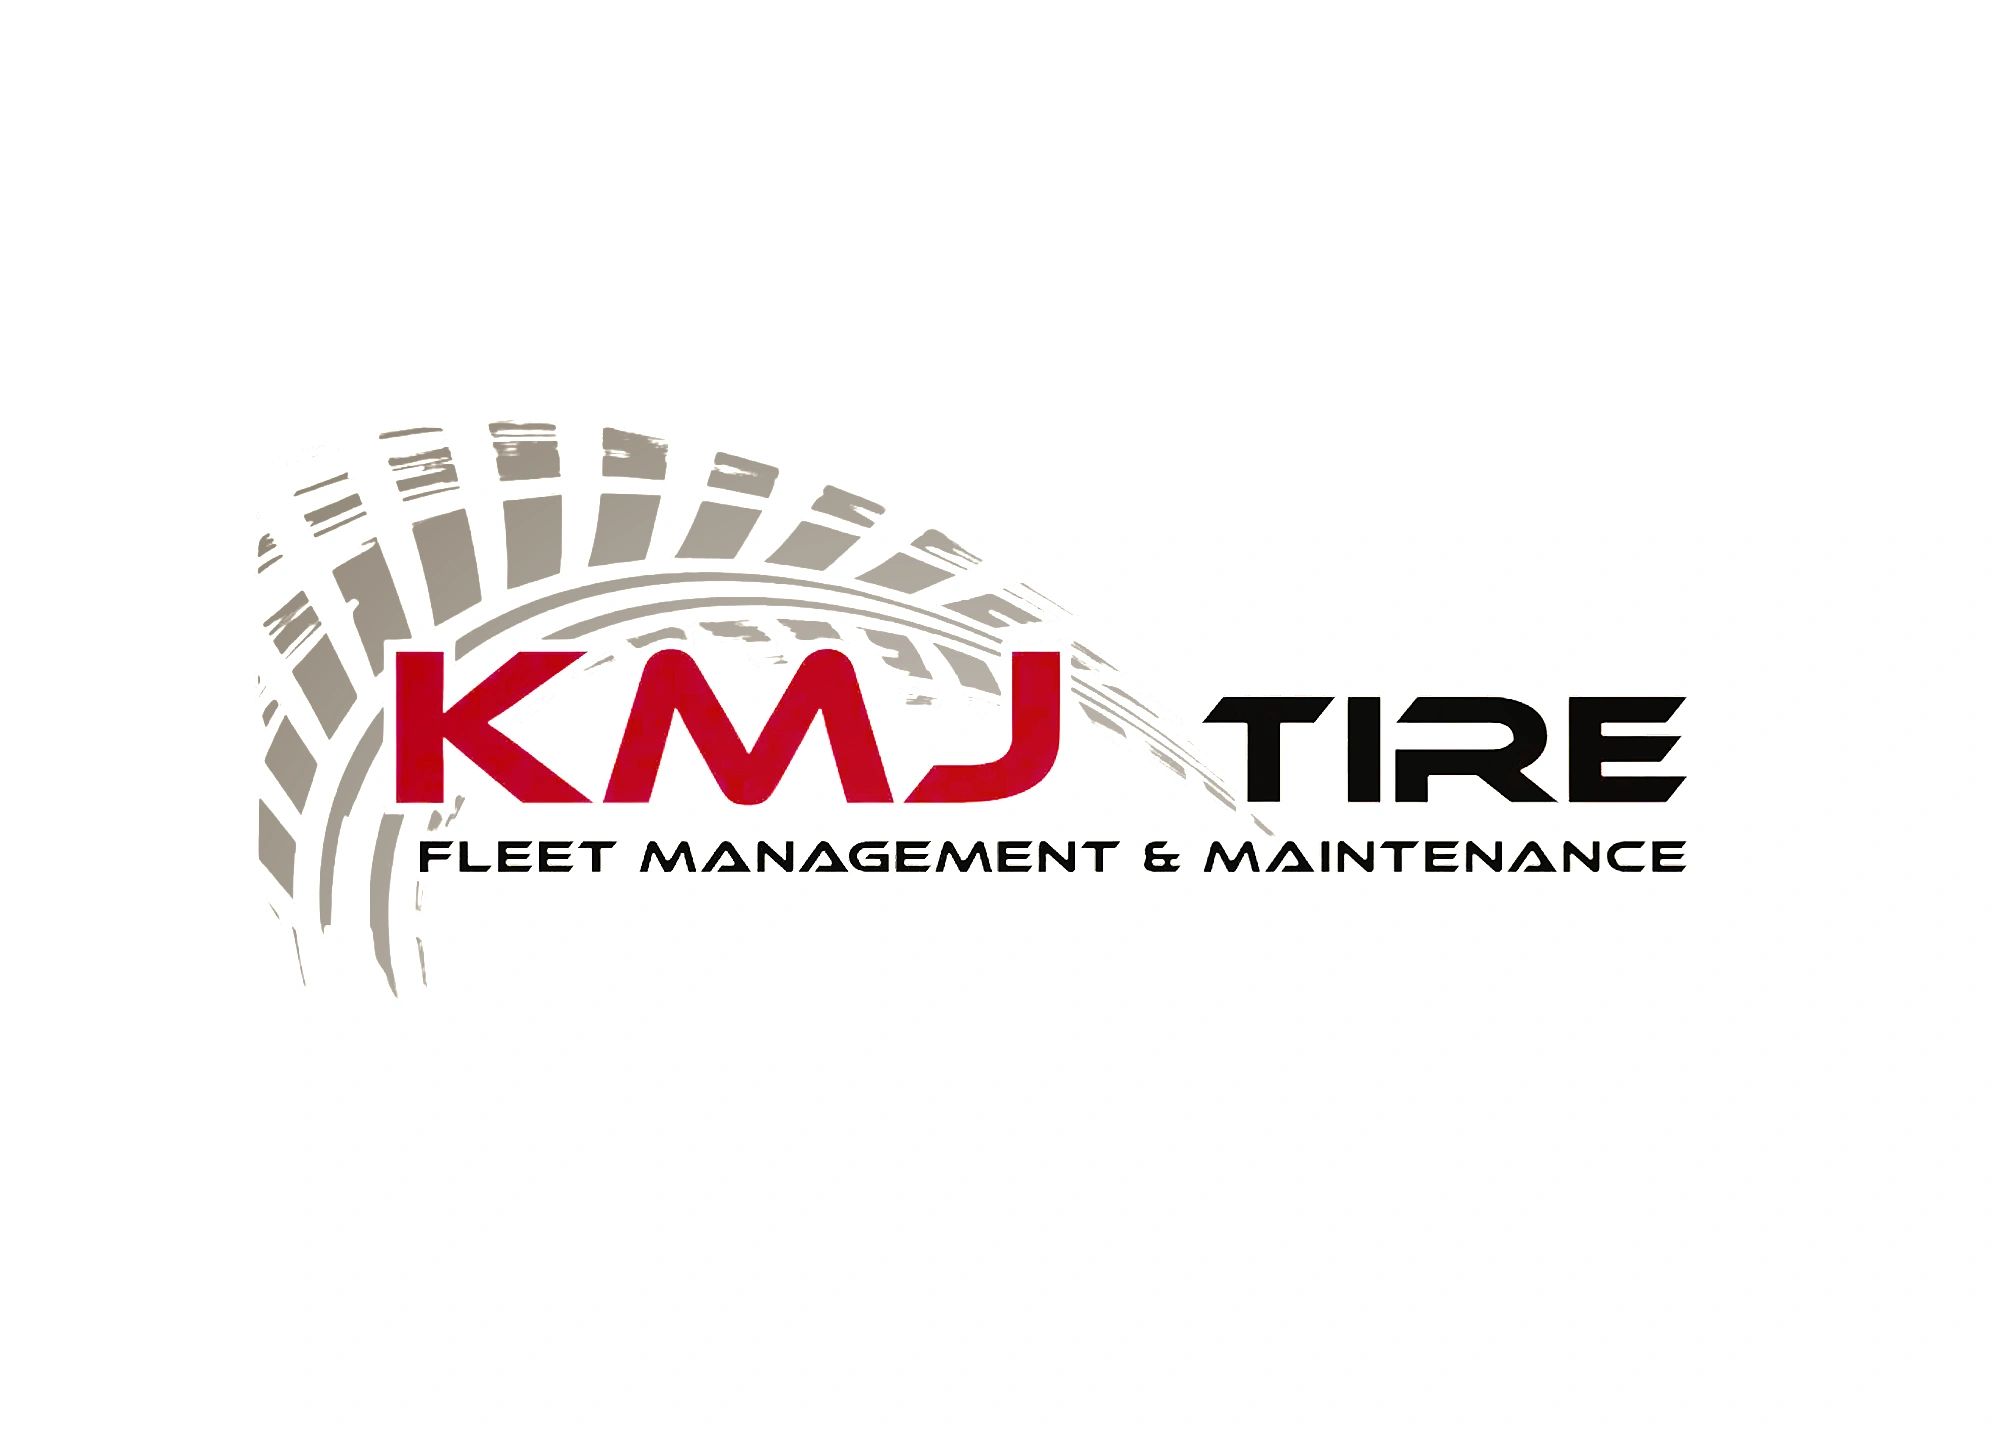 Calgary's Leading Tire Service, Specializing in all vehicles and commercial equipment,  Call Today